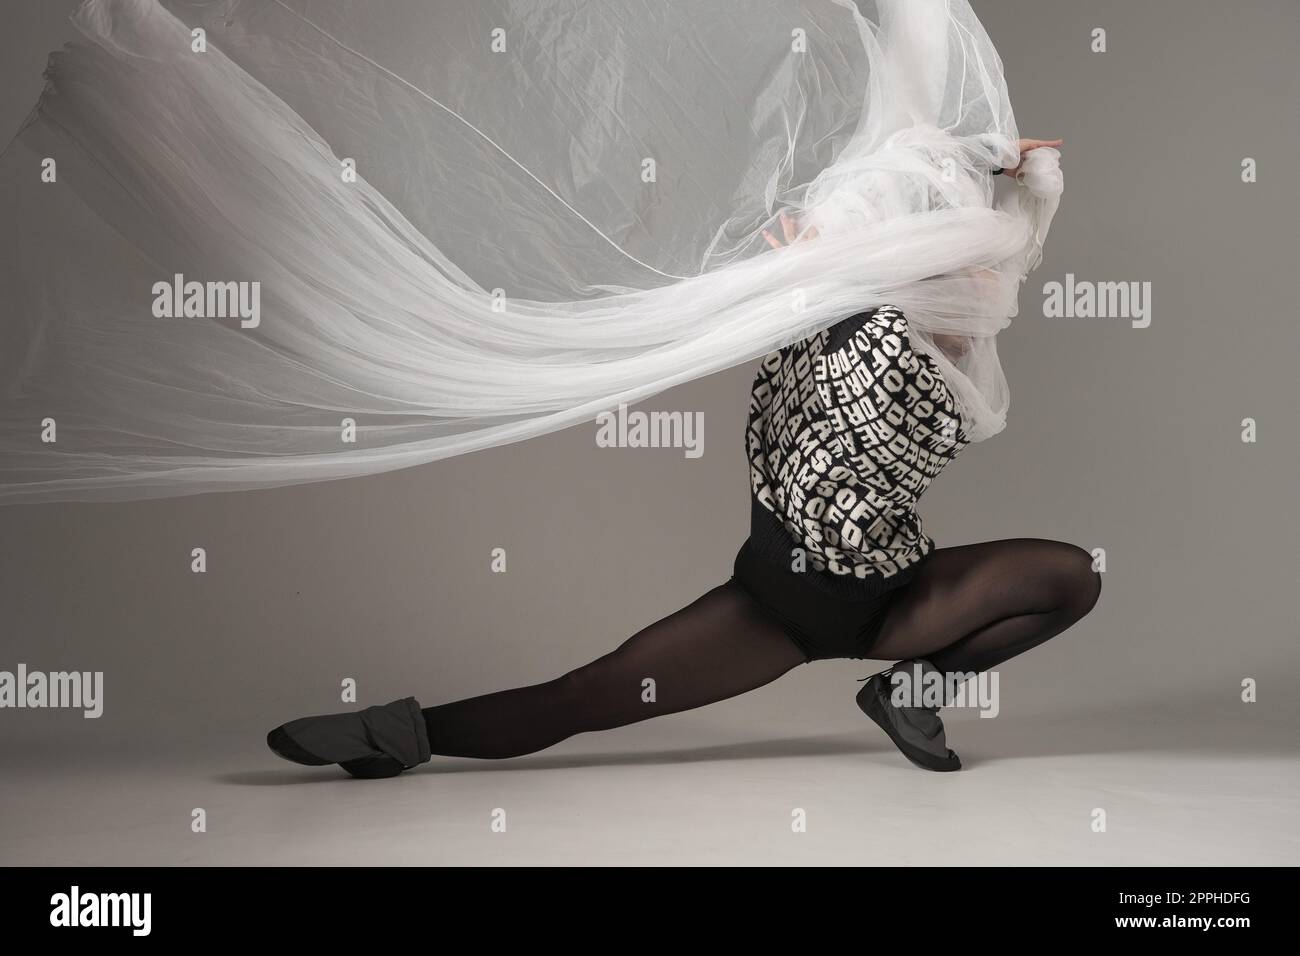 Ballerina Dancing with Silk Fabric, Modern Ballet Dancer with Waving white fabric, Gray Background. With text on sweater DREAMS OF Stock Photo